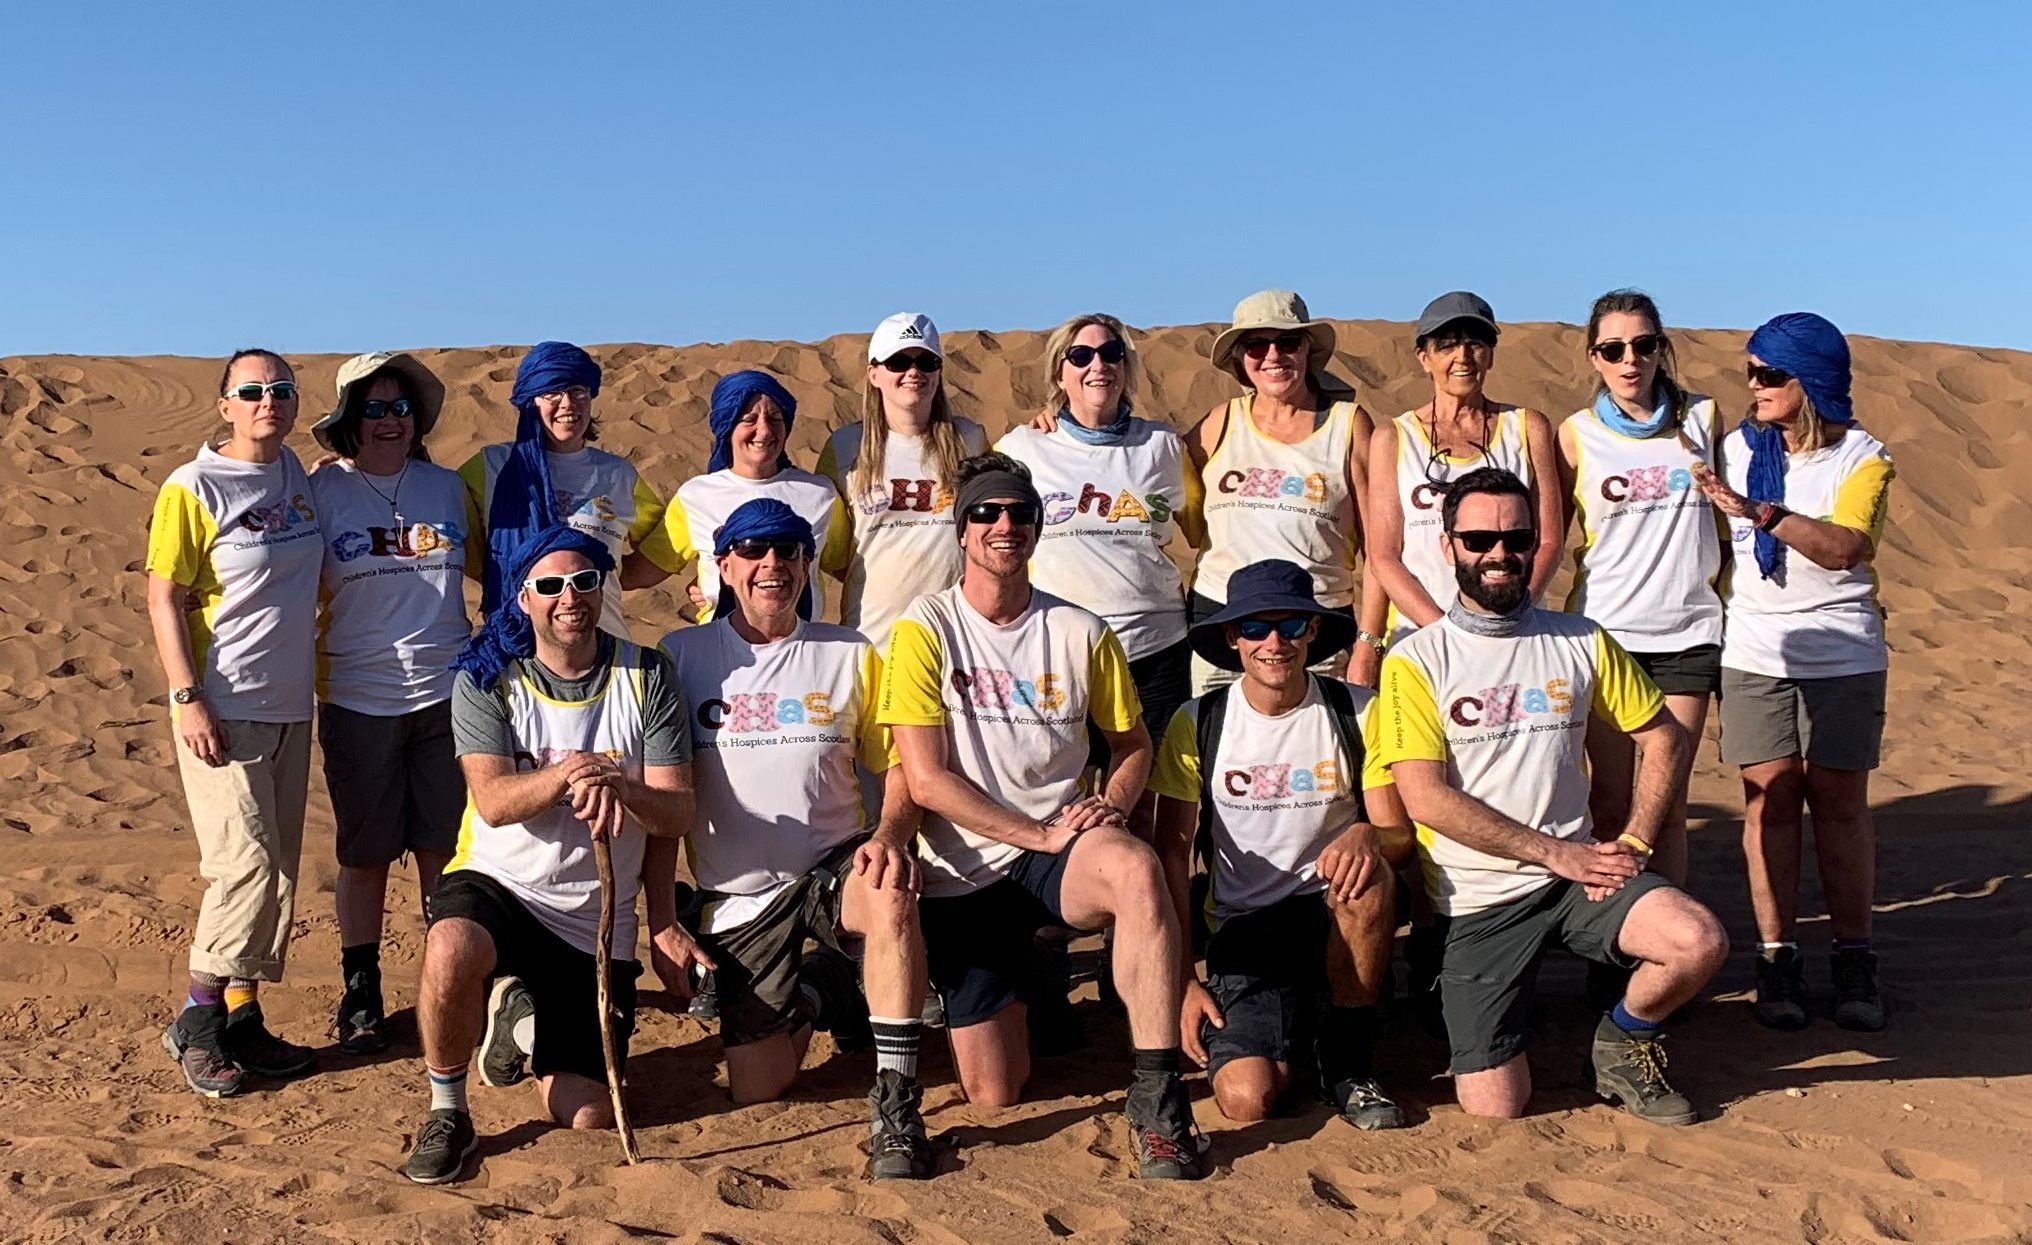 The group of 15 completed the four-day expedition raising £60,000 for Chas